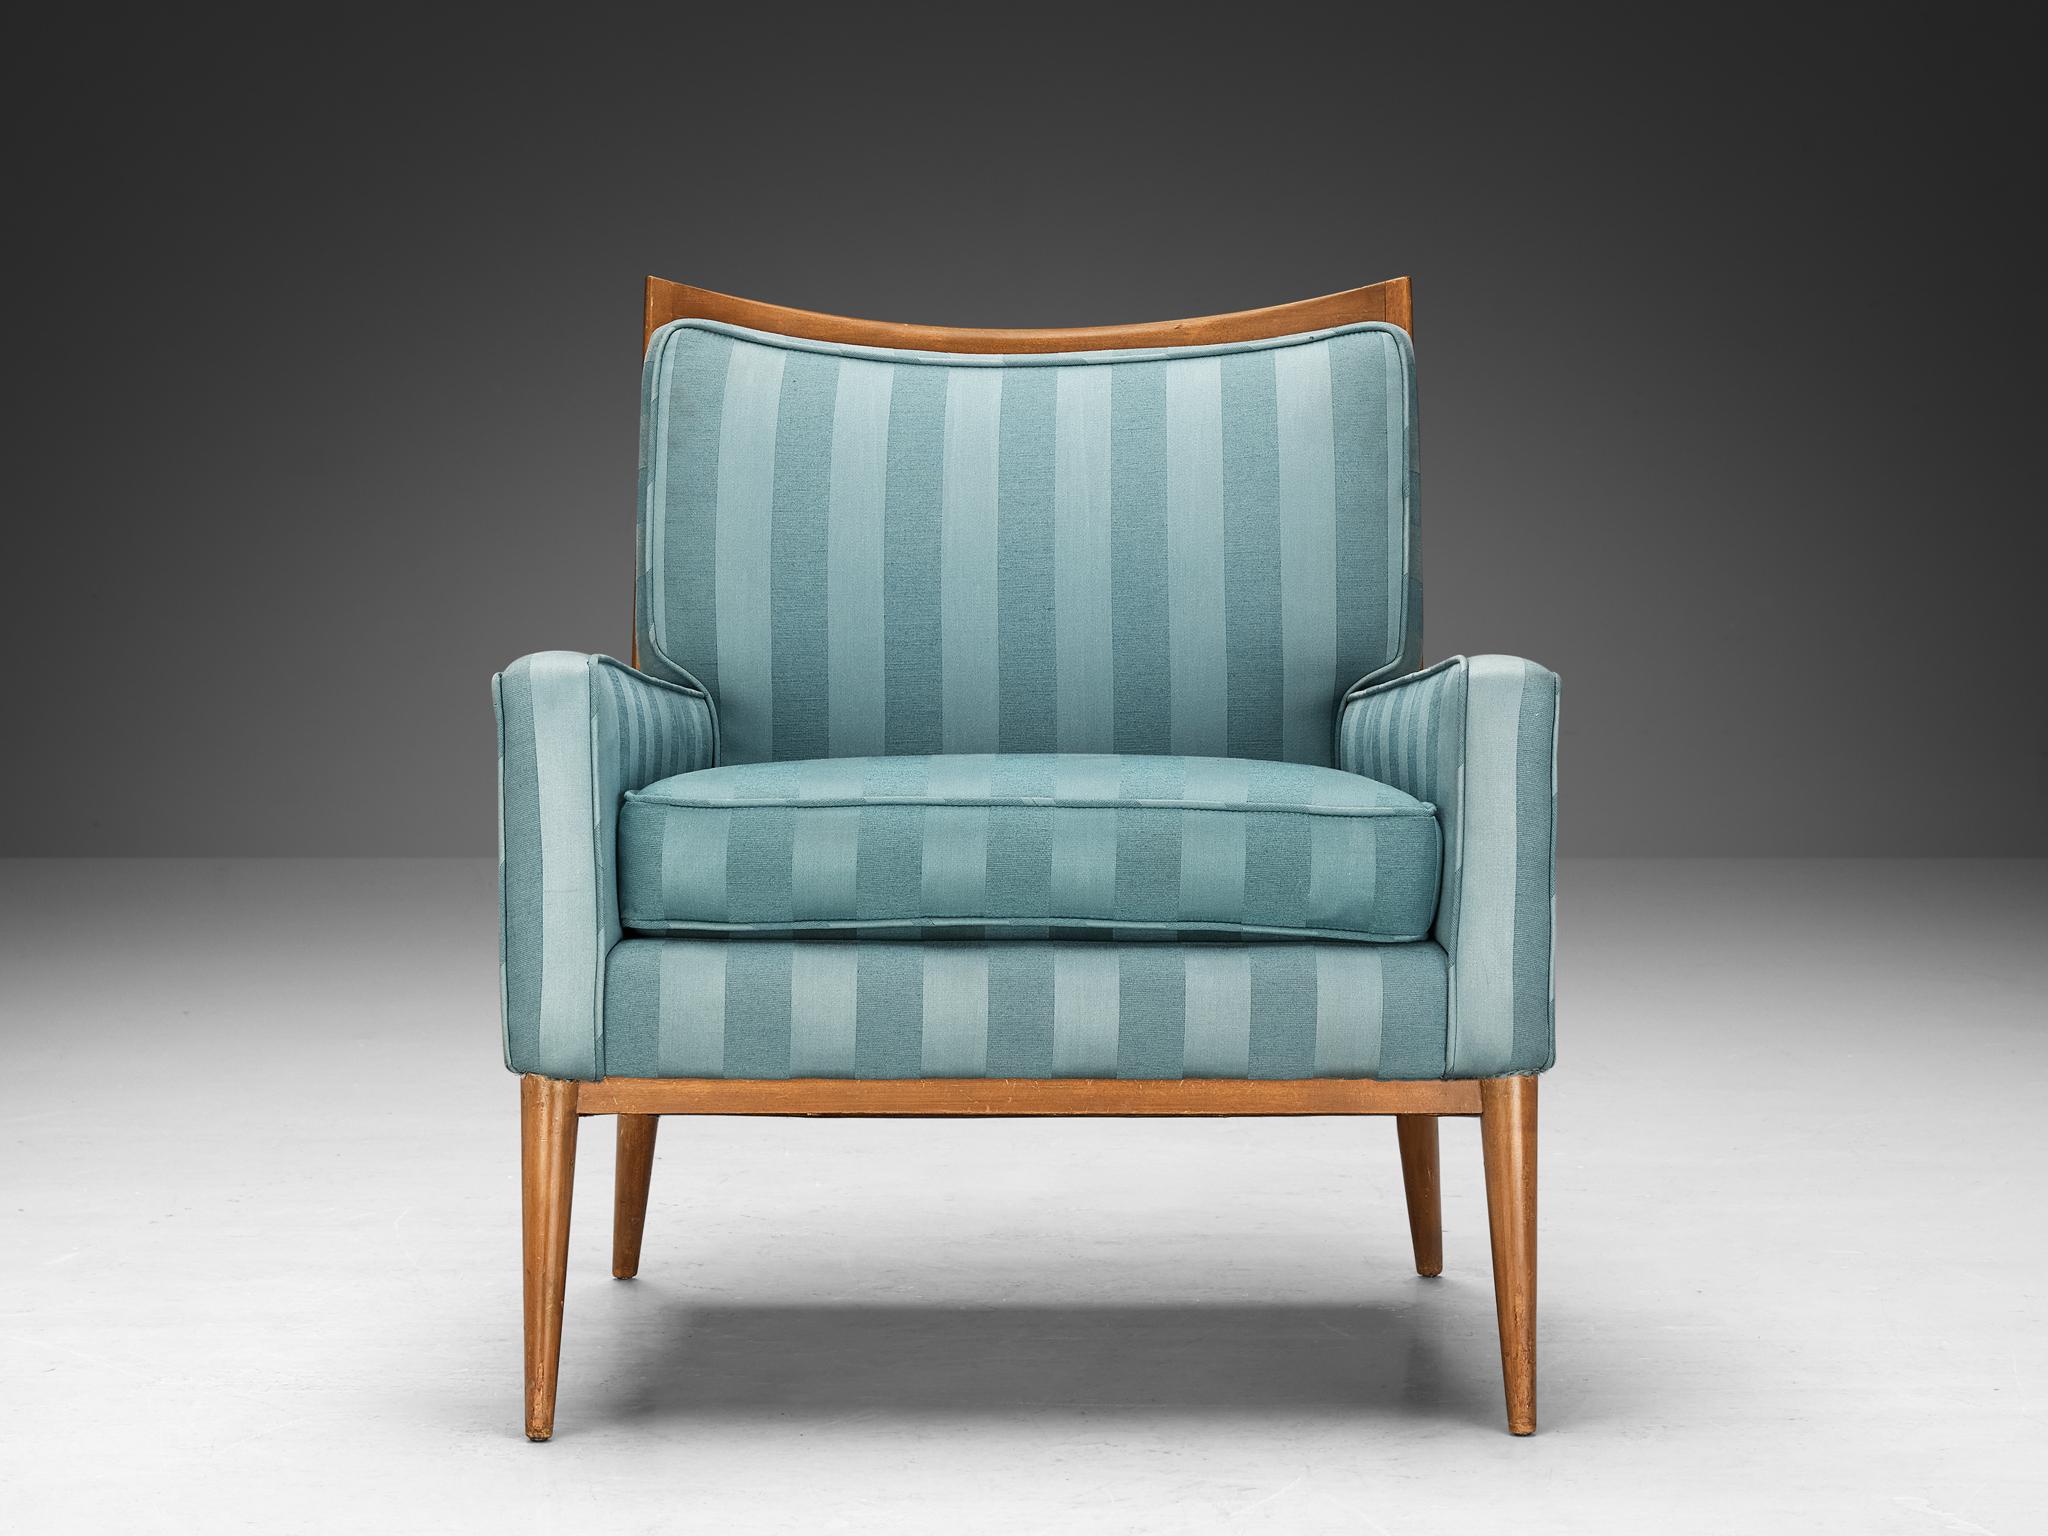 Paul McCobb Lounge Chair in Original Turquoise Upholstery and Walnut  For Sale 1